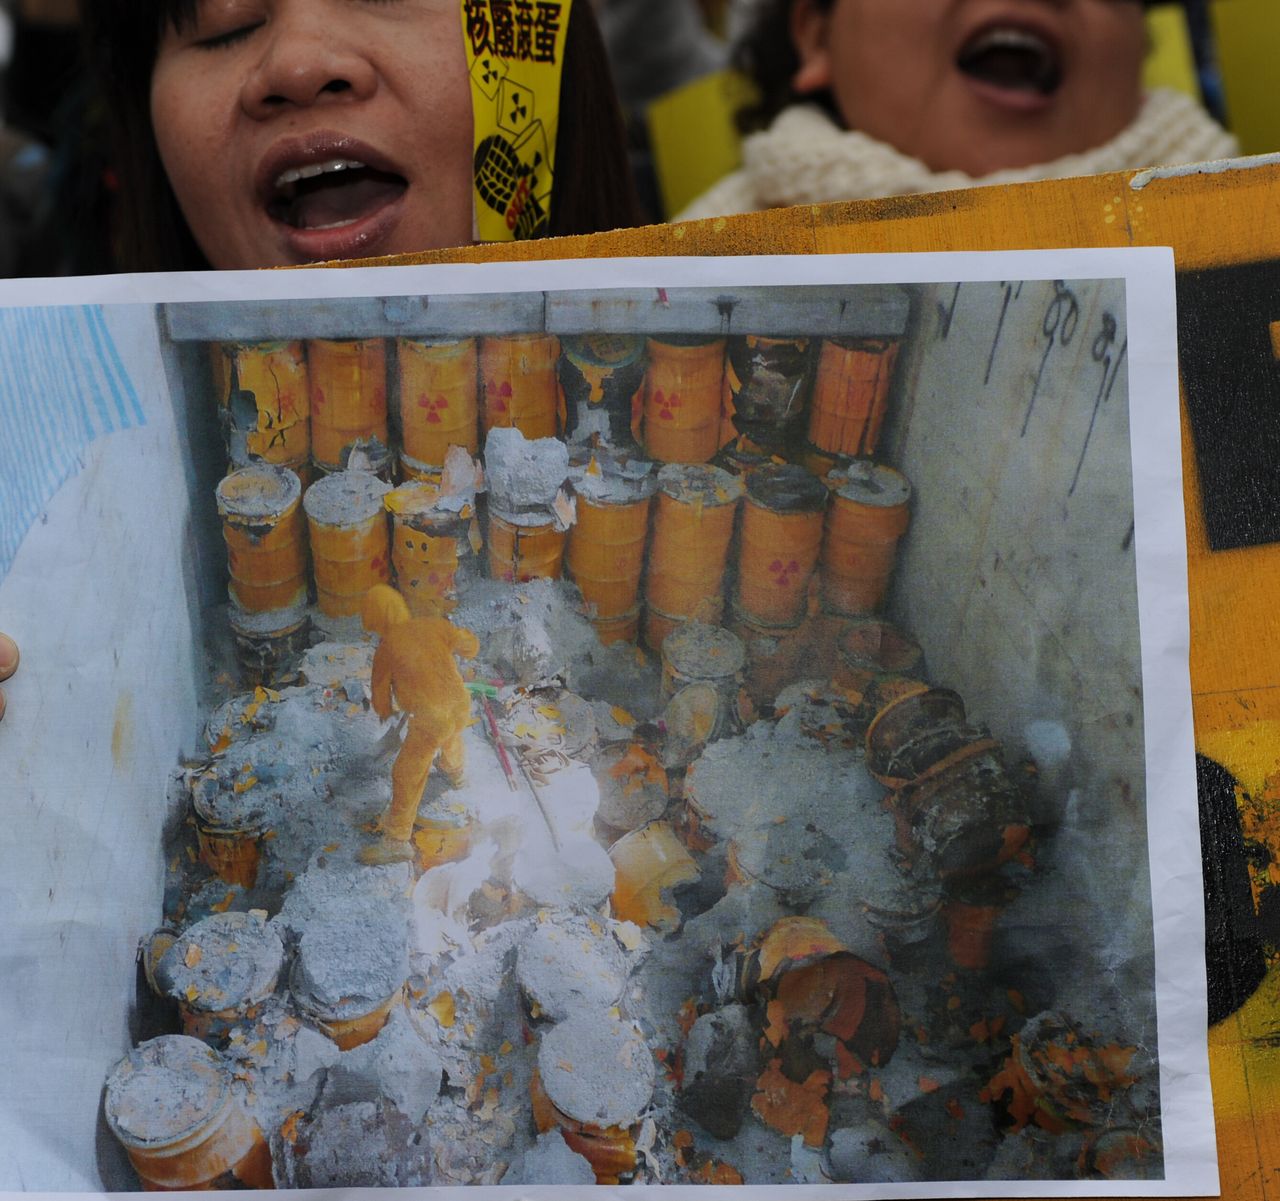 Demonstrators display a picture of nuclear waste stockpiled on Orchid Island during an anti-nuclear-power demonstration in Taipei on March 11, 2012. Thousands of people chanted anti-nuclear slogans as they marched through downtown Taipei demanding that the government shut down its three nuclear power plants in operation and halt construction on a fourth.